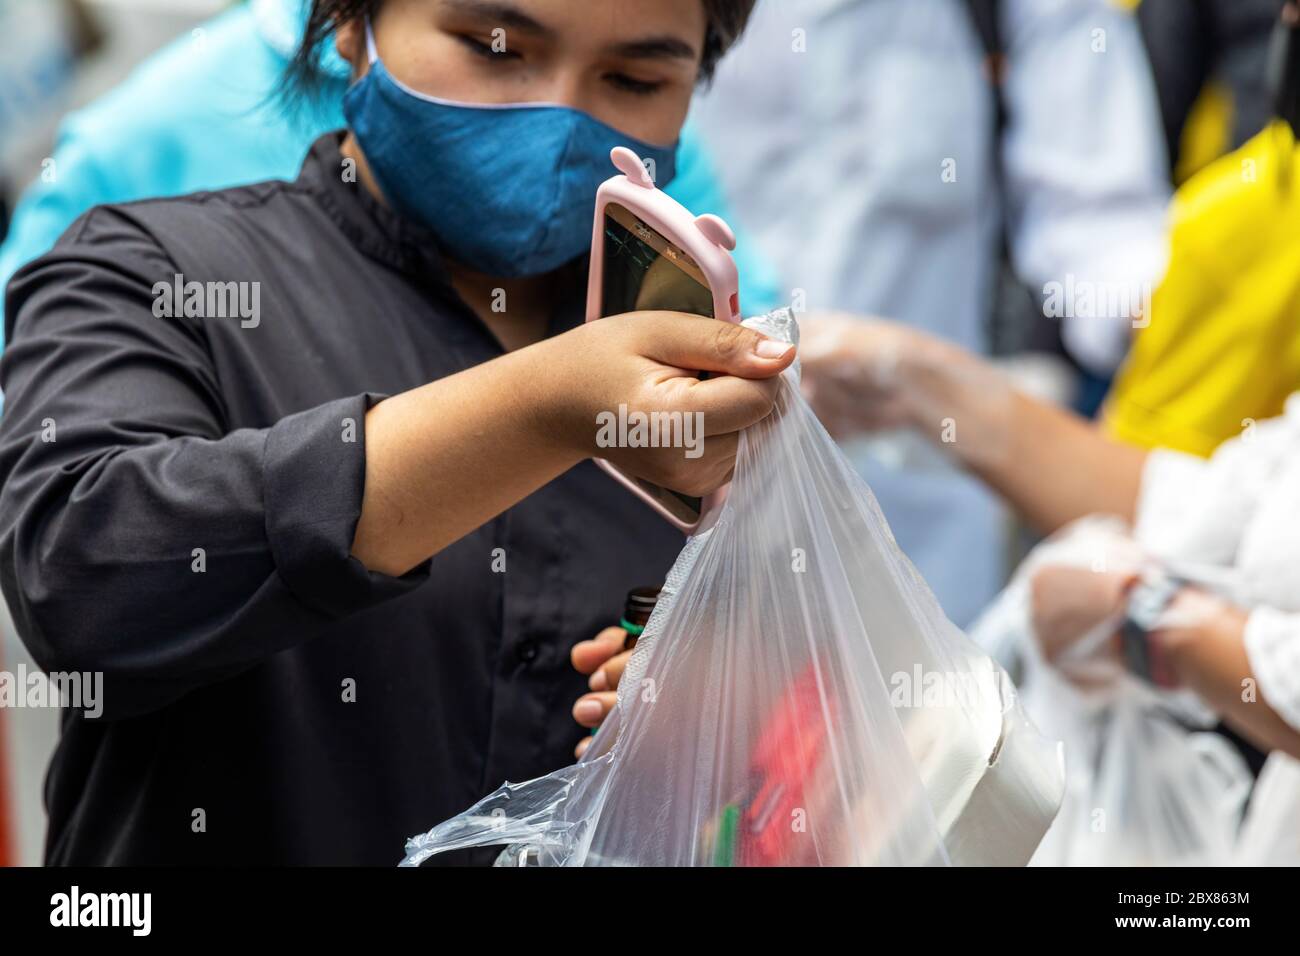 Lady with face mask receiving plastic bag full of free food during Covid pandemic, Bangkok, Thailand Stock Photo